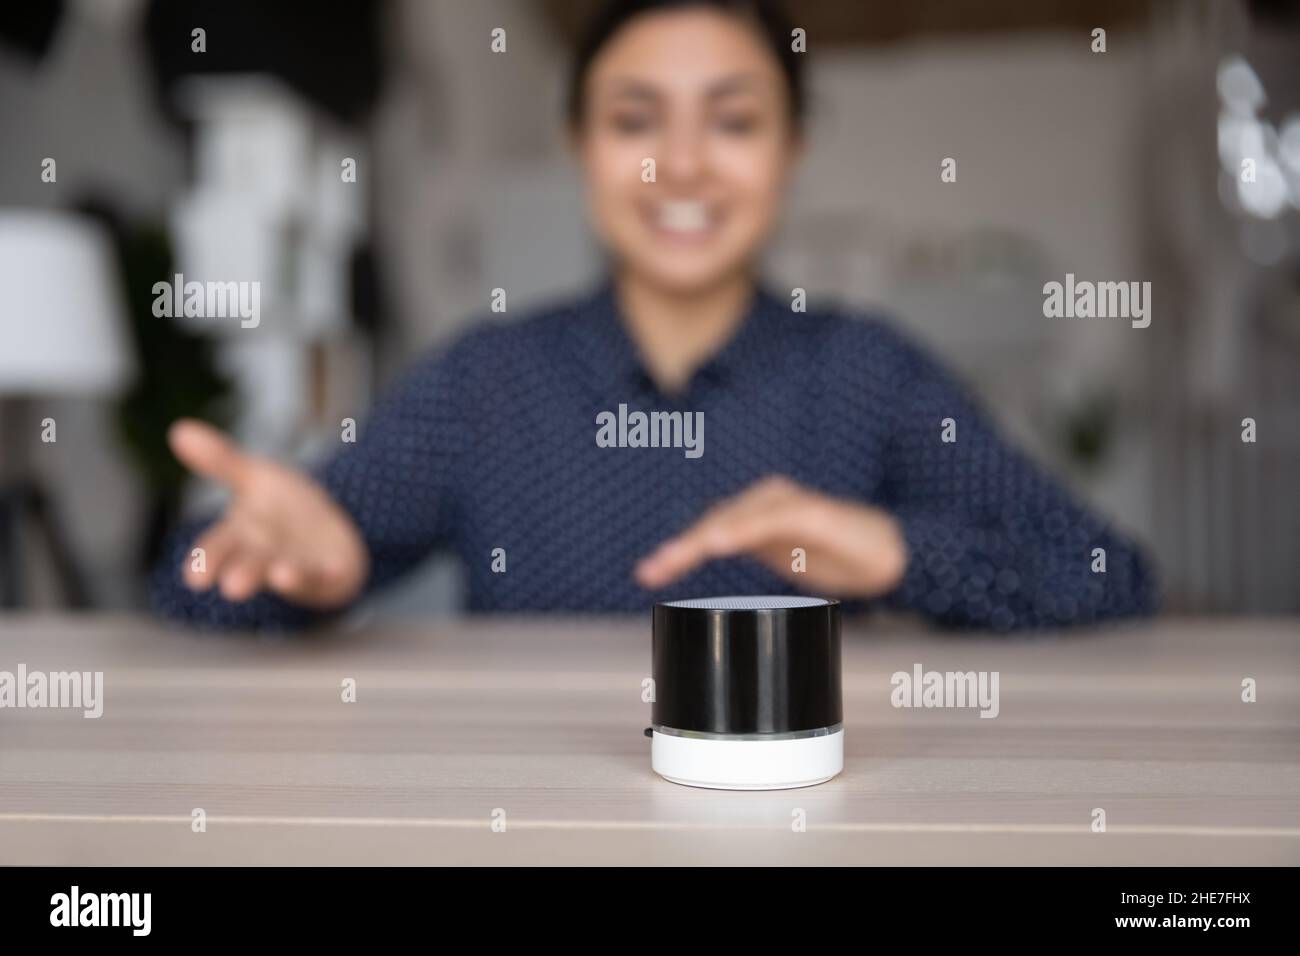 Small portable speaker for voice assistance app using Stock Photo